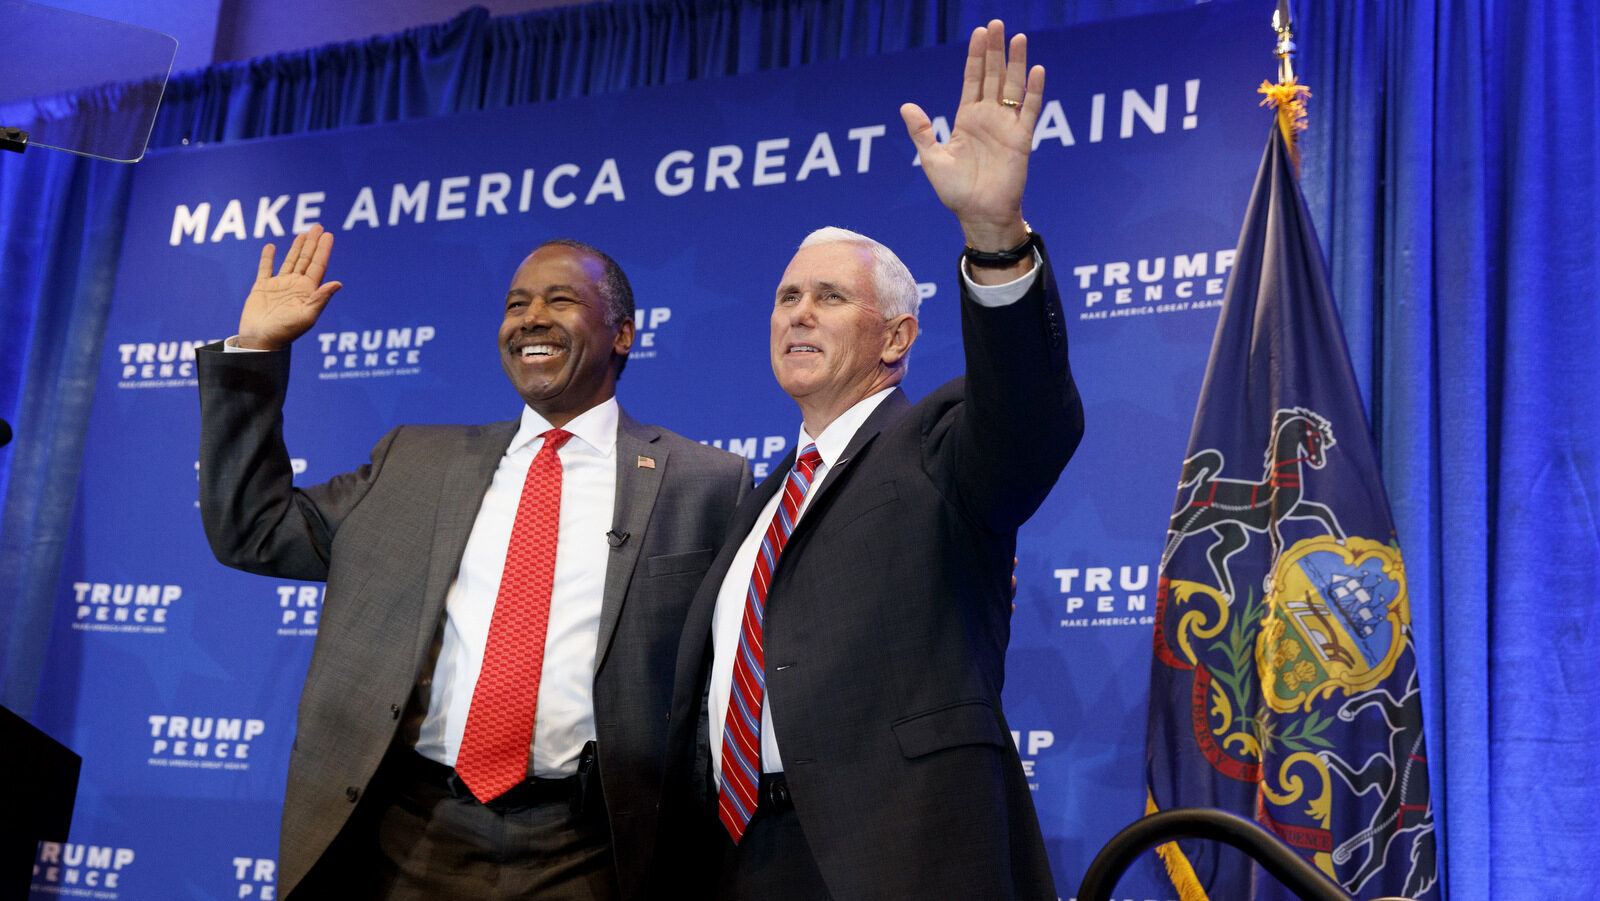 Dr. Ben Carson stands with Republican vice president-elect Mike Pence, before a speech on healthcare by Republican presidential candidate Donald Trump, Tuesday, Nov. 1, 2016, in King of Prussia, Pa. (AP Photo/ Evan Vucci)